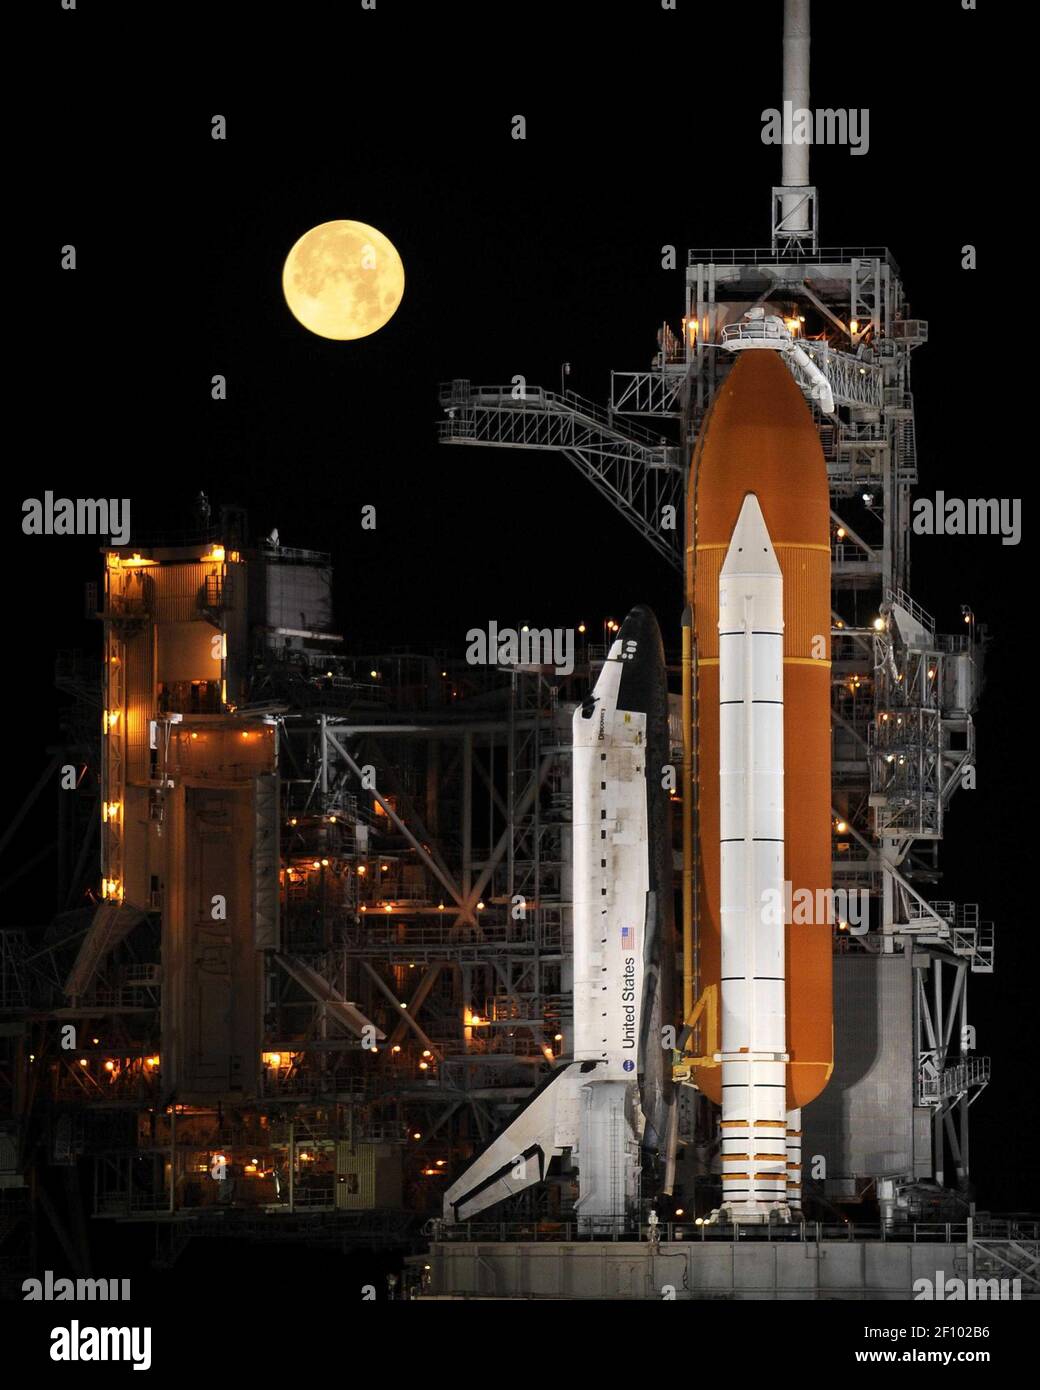 11 March 2009 - Florida - Under a full moon on Launch Pad 39A at NASA's Kennedy Space Center in Florida, space shuttle Discovery is revealed after the rotating service structure has been rolled back. The rollback is in preparation for Discovery's liftoff on the STS-119 mission with a crew of seven. Photo Credit: Bill Ingalls / NASA /Sipa Press/0903122010 Stock Photo